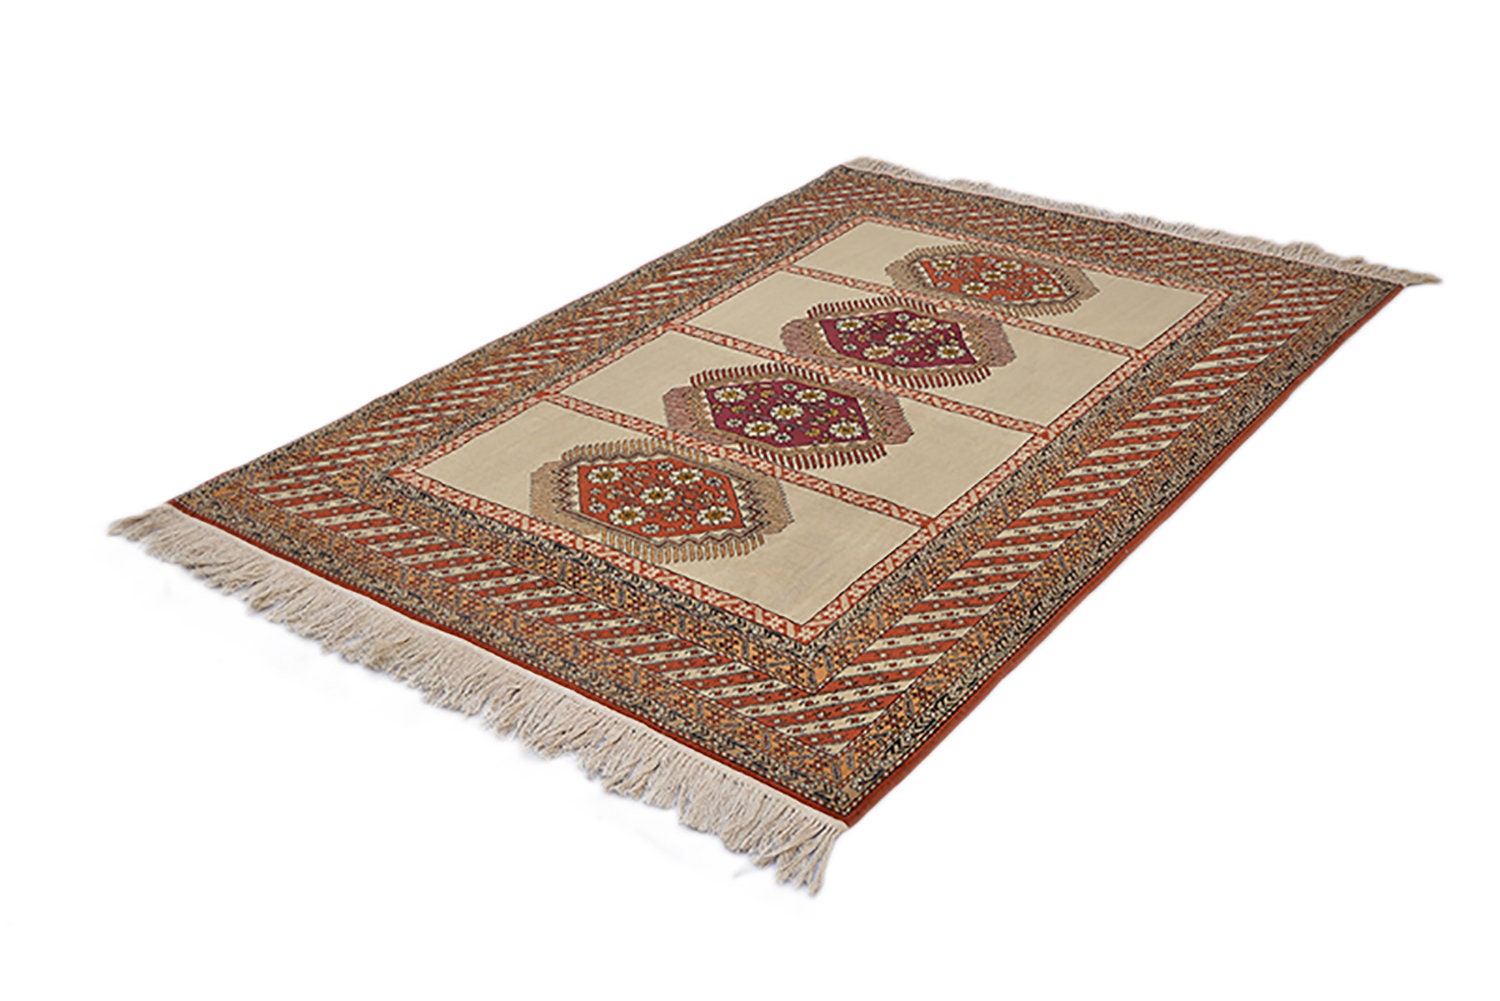 Beige Brown Area Rug | Handmade Persian Caucasian | Red Medallions | 5 x 7 Feet | Rustic Style Neutral Rug Soft Pile Rug